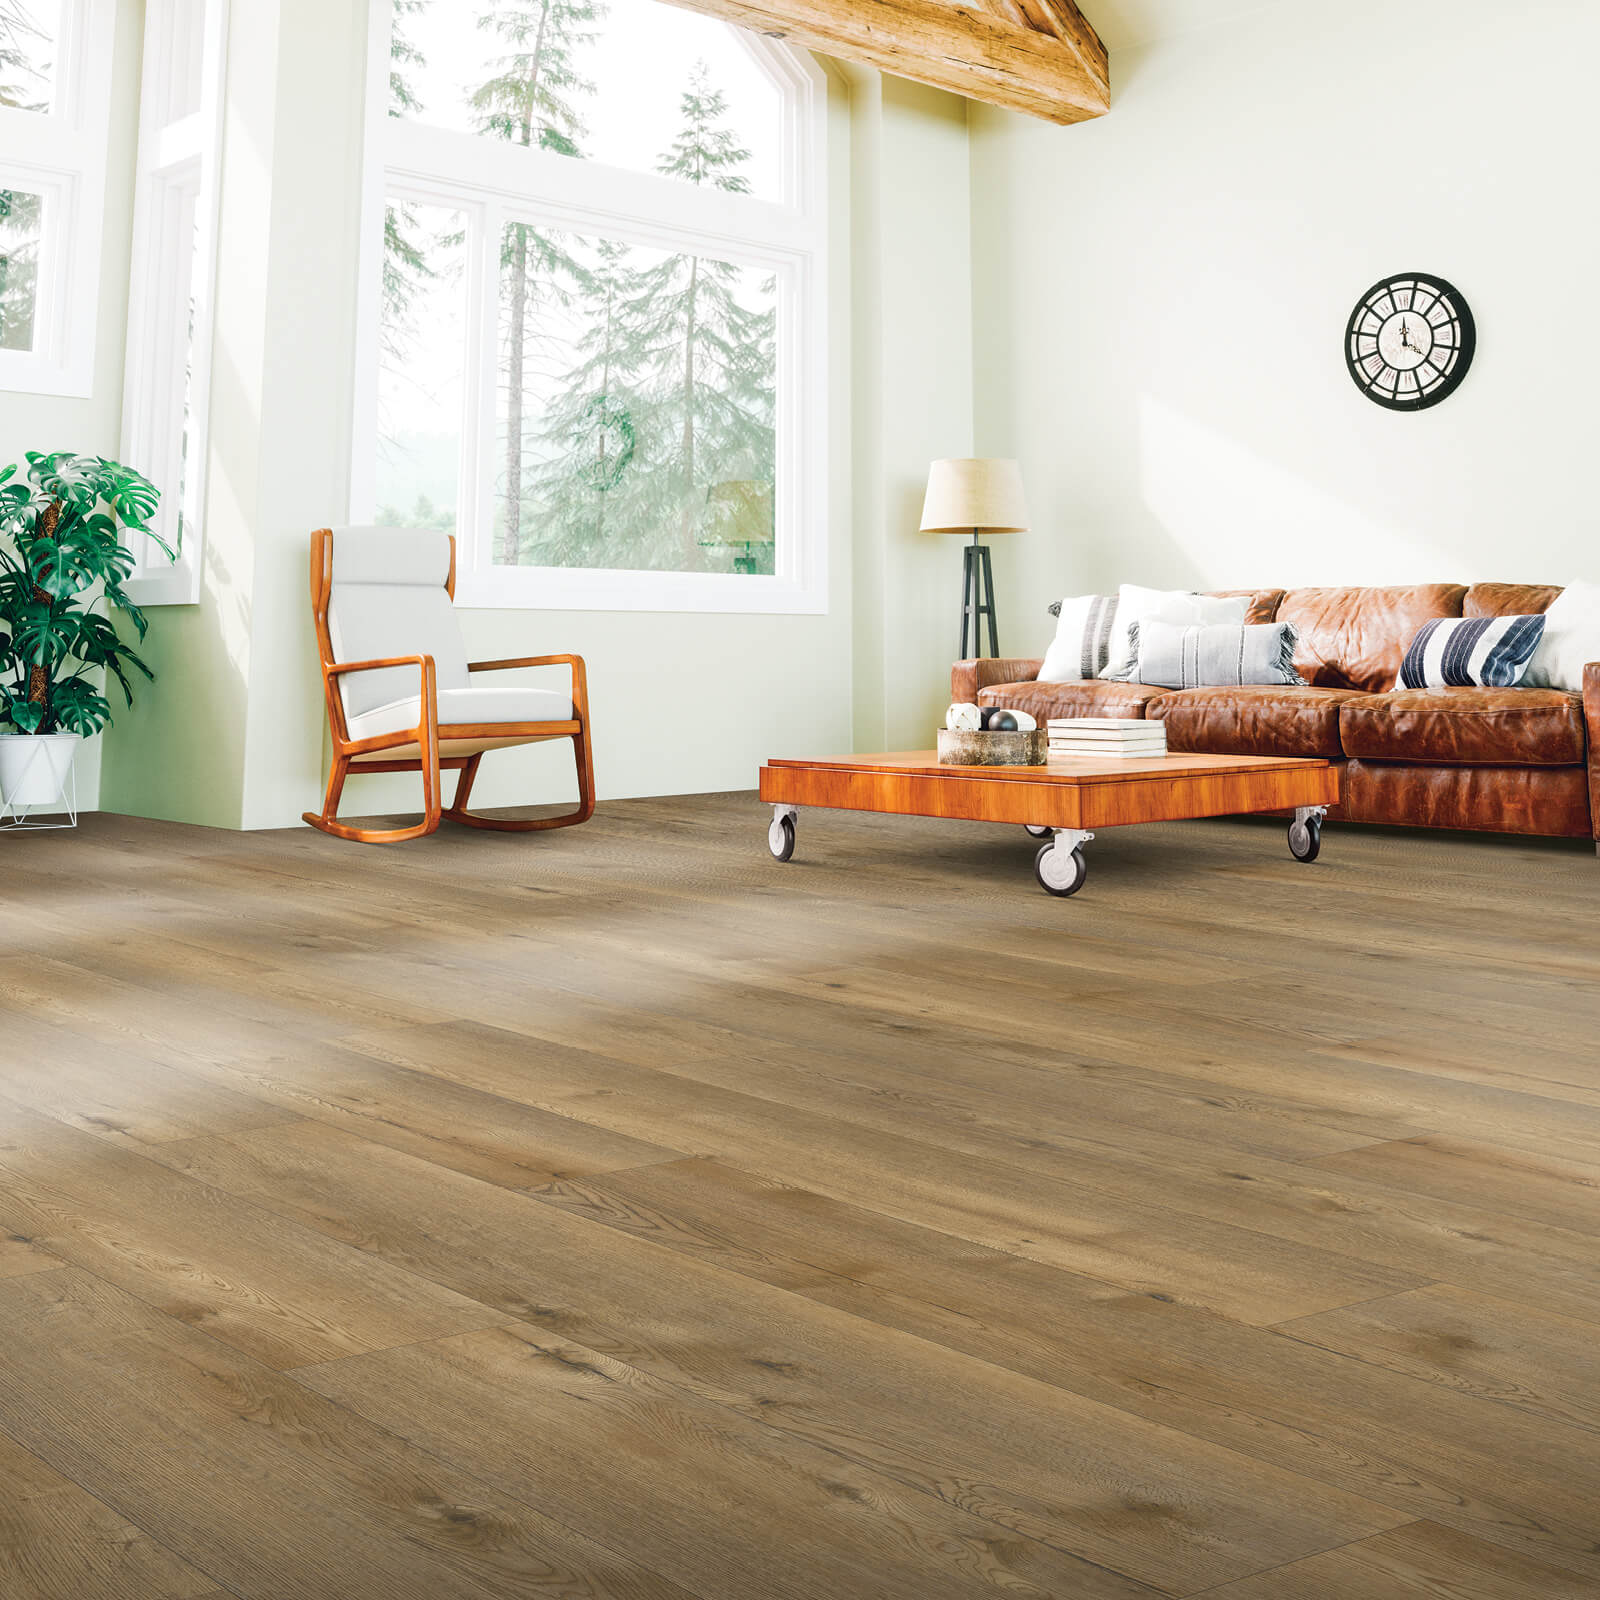 Spacious living room with laminate floor | The L&L Company